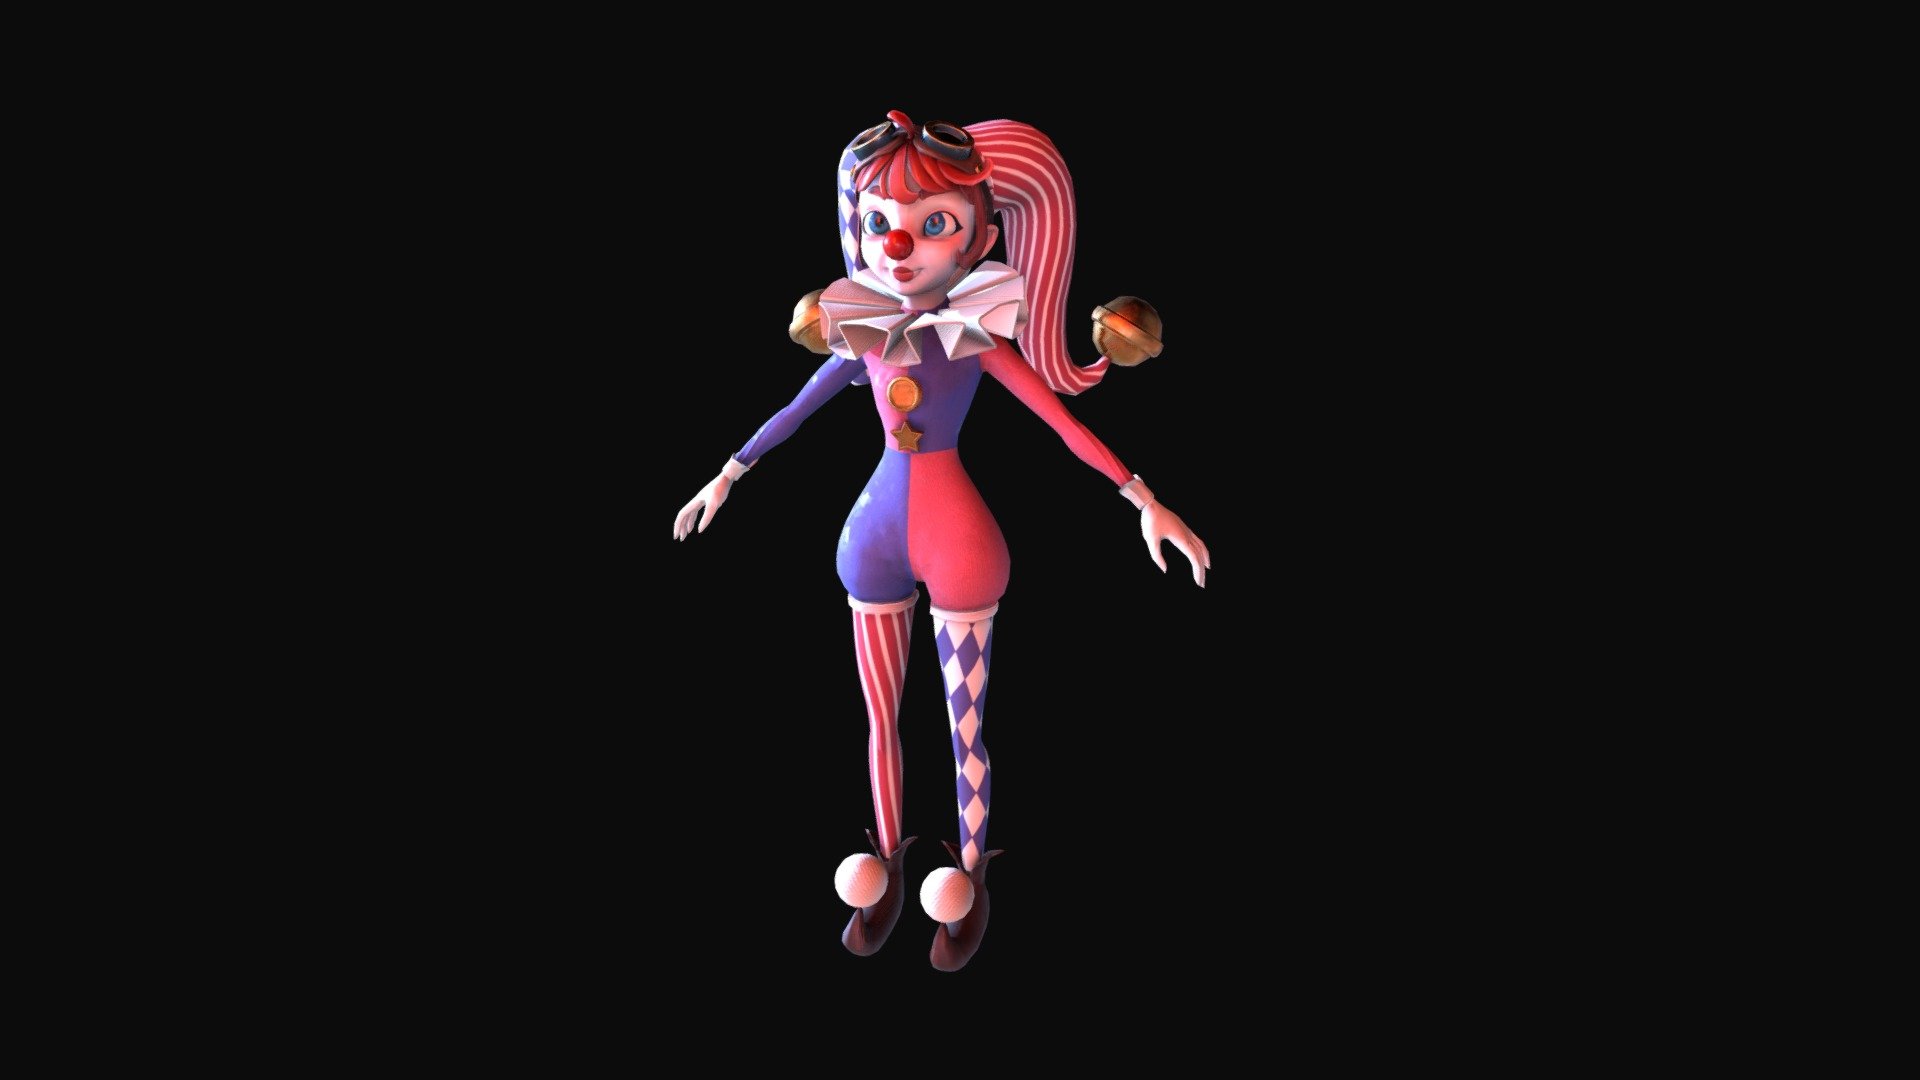 This is a character model I made for a circus themed game project called &lsquo;Loopy is Late'. This project was part of my study's curriculum.
Everything took me about 1 and a half weeks to make in total. It was really nice to see the concept of Loopy come to life!
I still have a lot to learn so feedback is always welcome! - Loopy the Clown - 3D model by Luna Bilani (@LunaBilani) 3d model